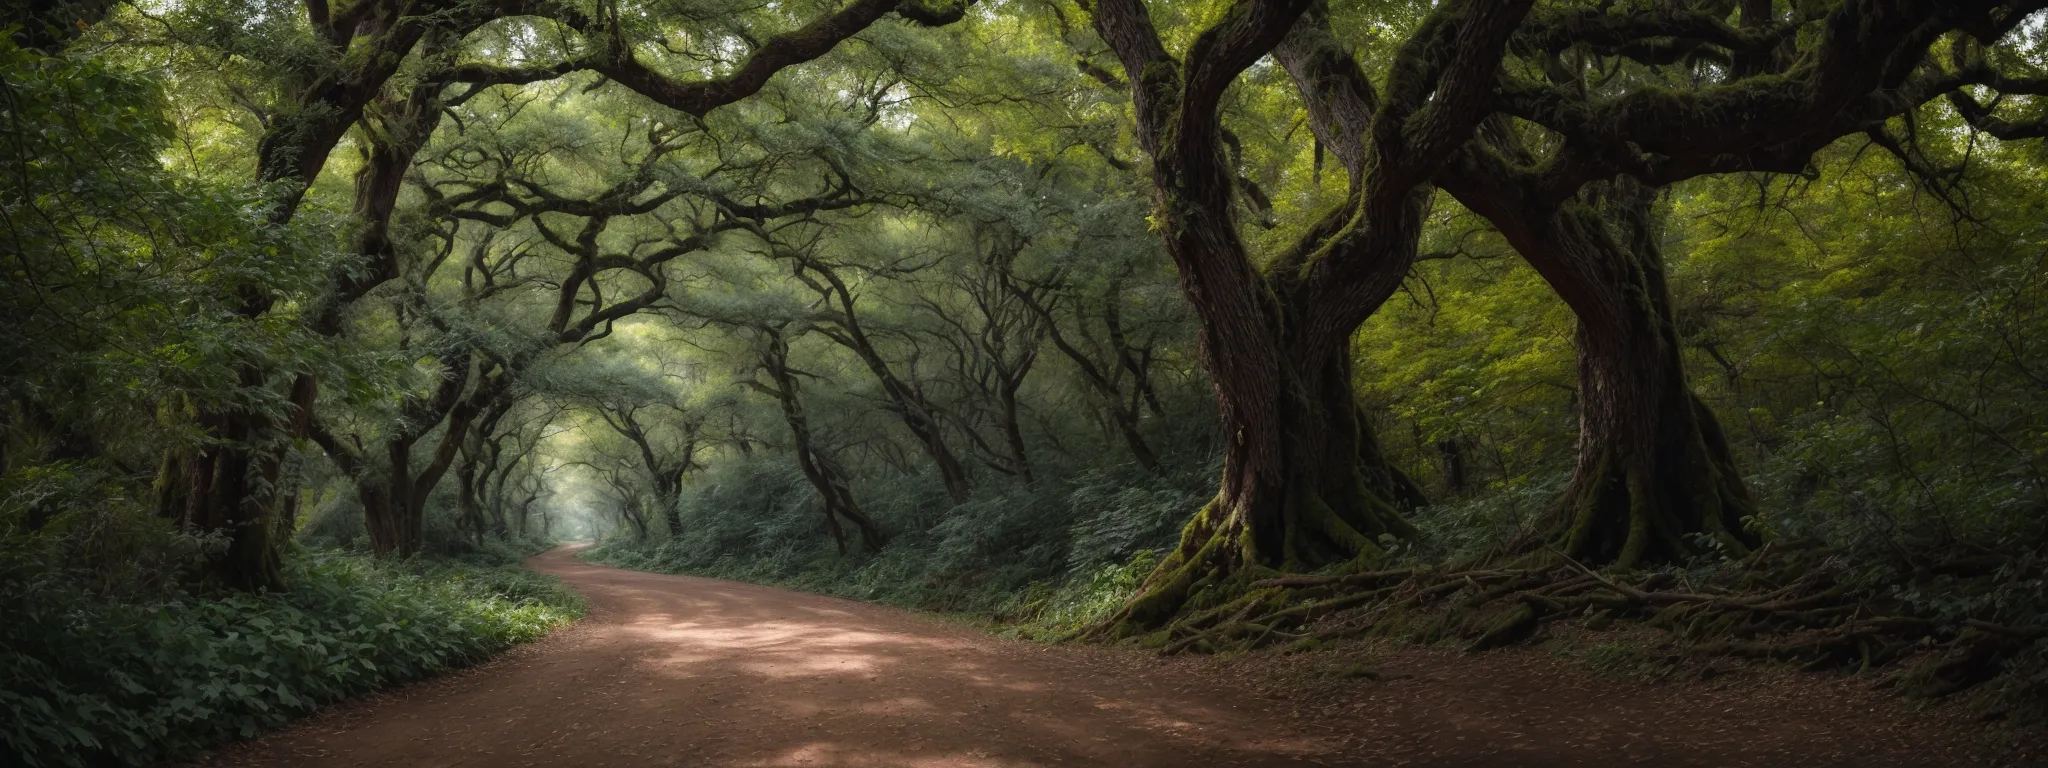 a serene forest path diverging in two directions under the canopy of ancient trees.